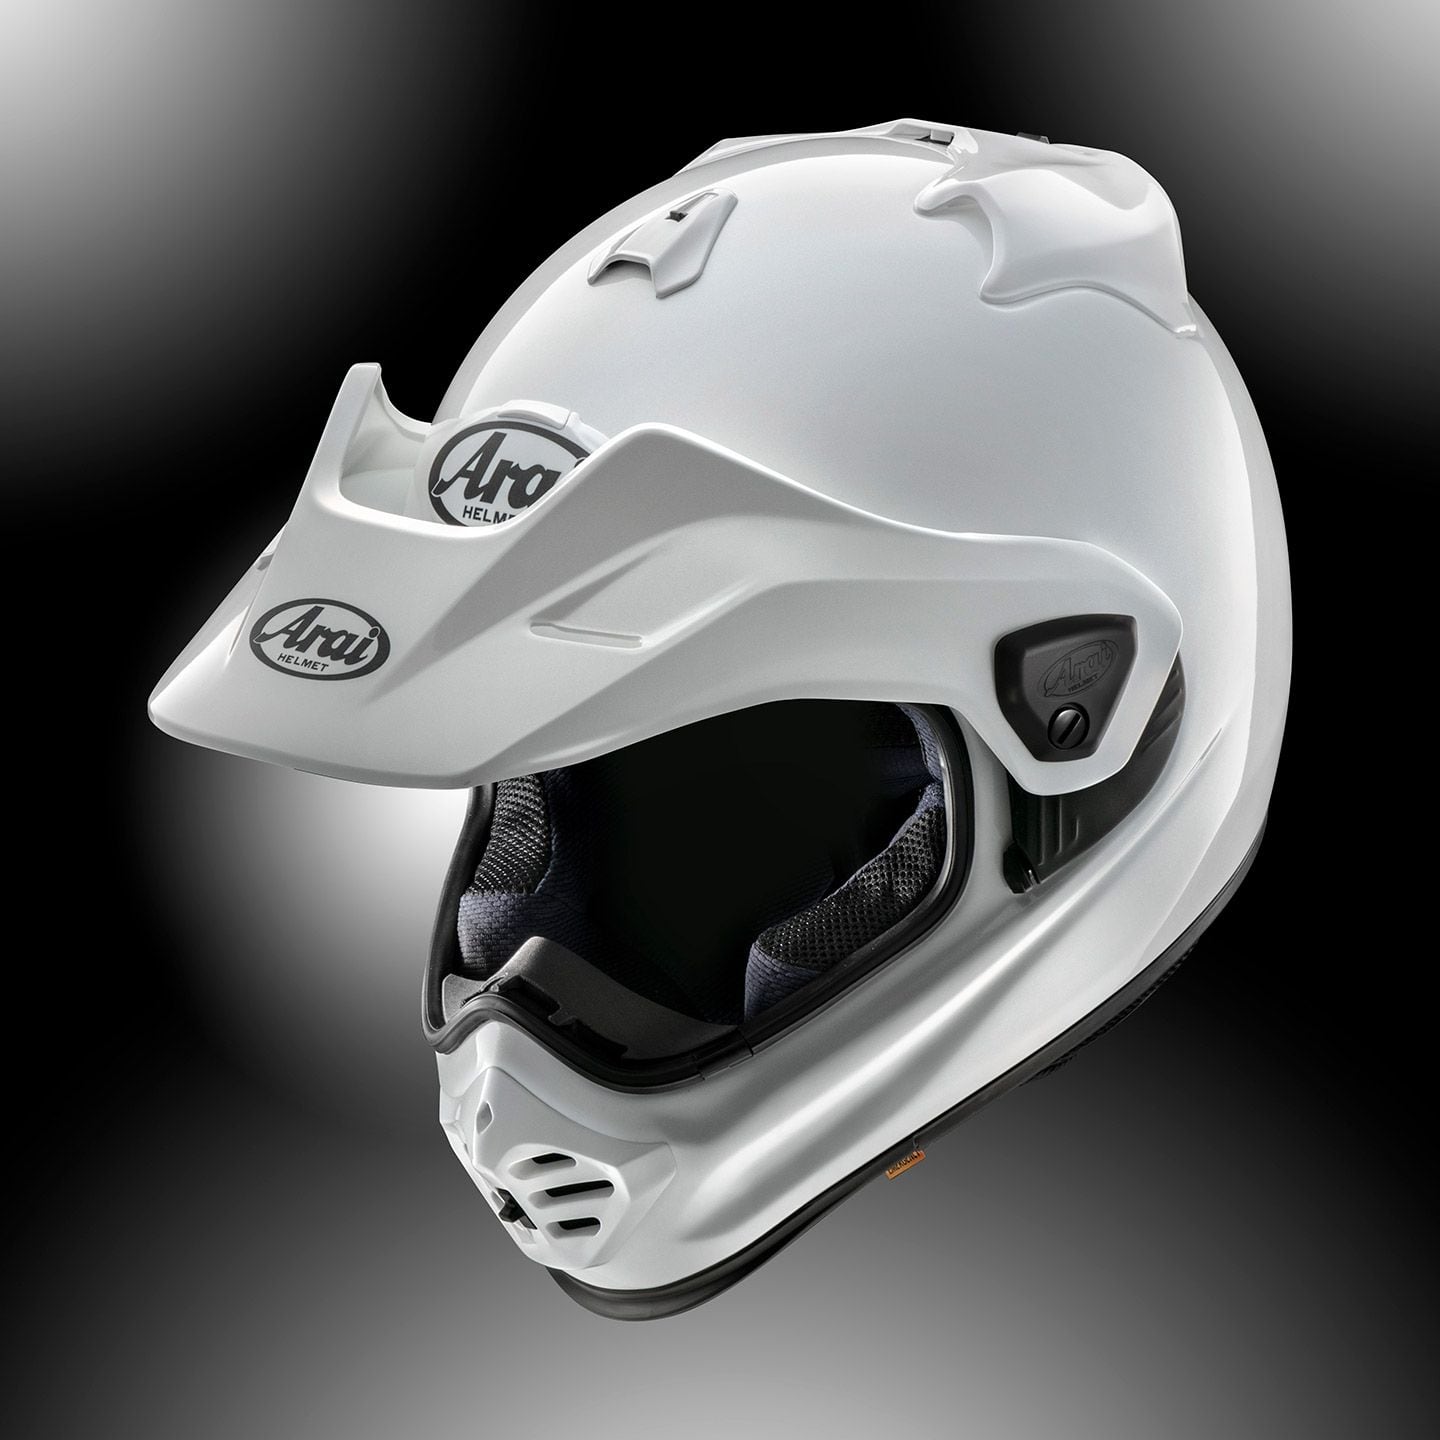 Ditch the face shield, replace with goggles, and you're ready to take the XD-5 off-road.